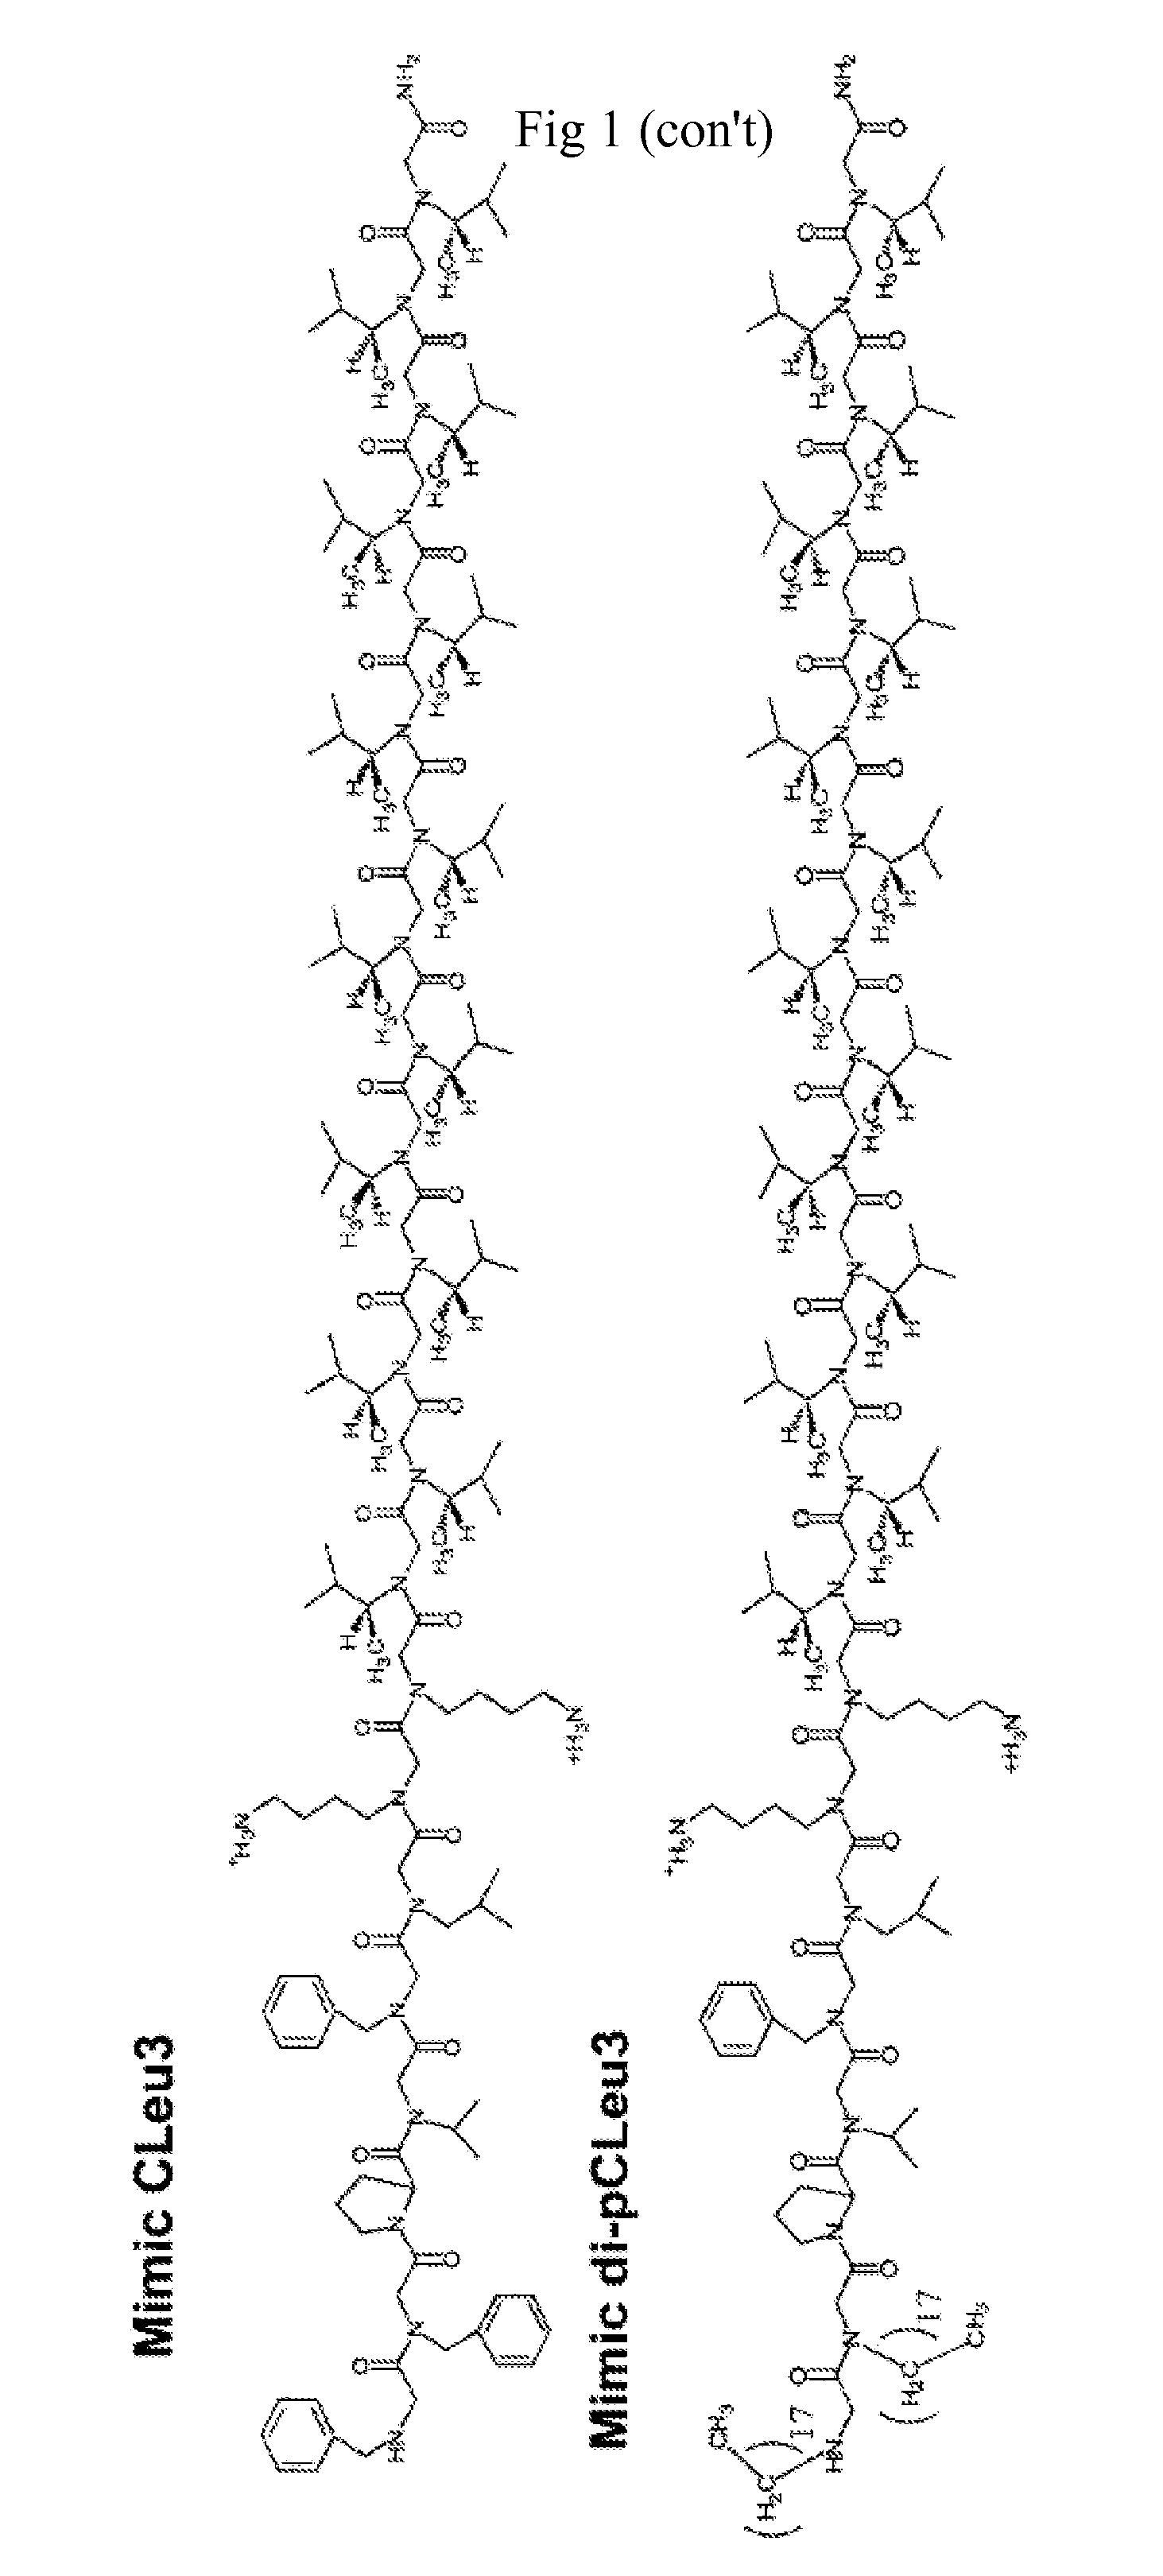 Alkylated sp-c peptoid compounds and related surfactant compositions